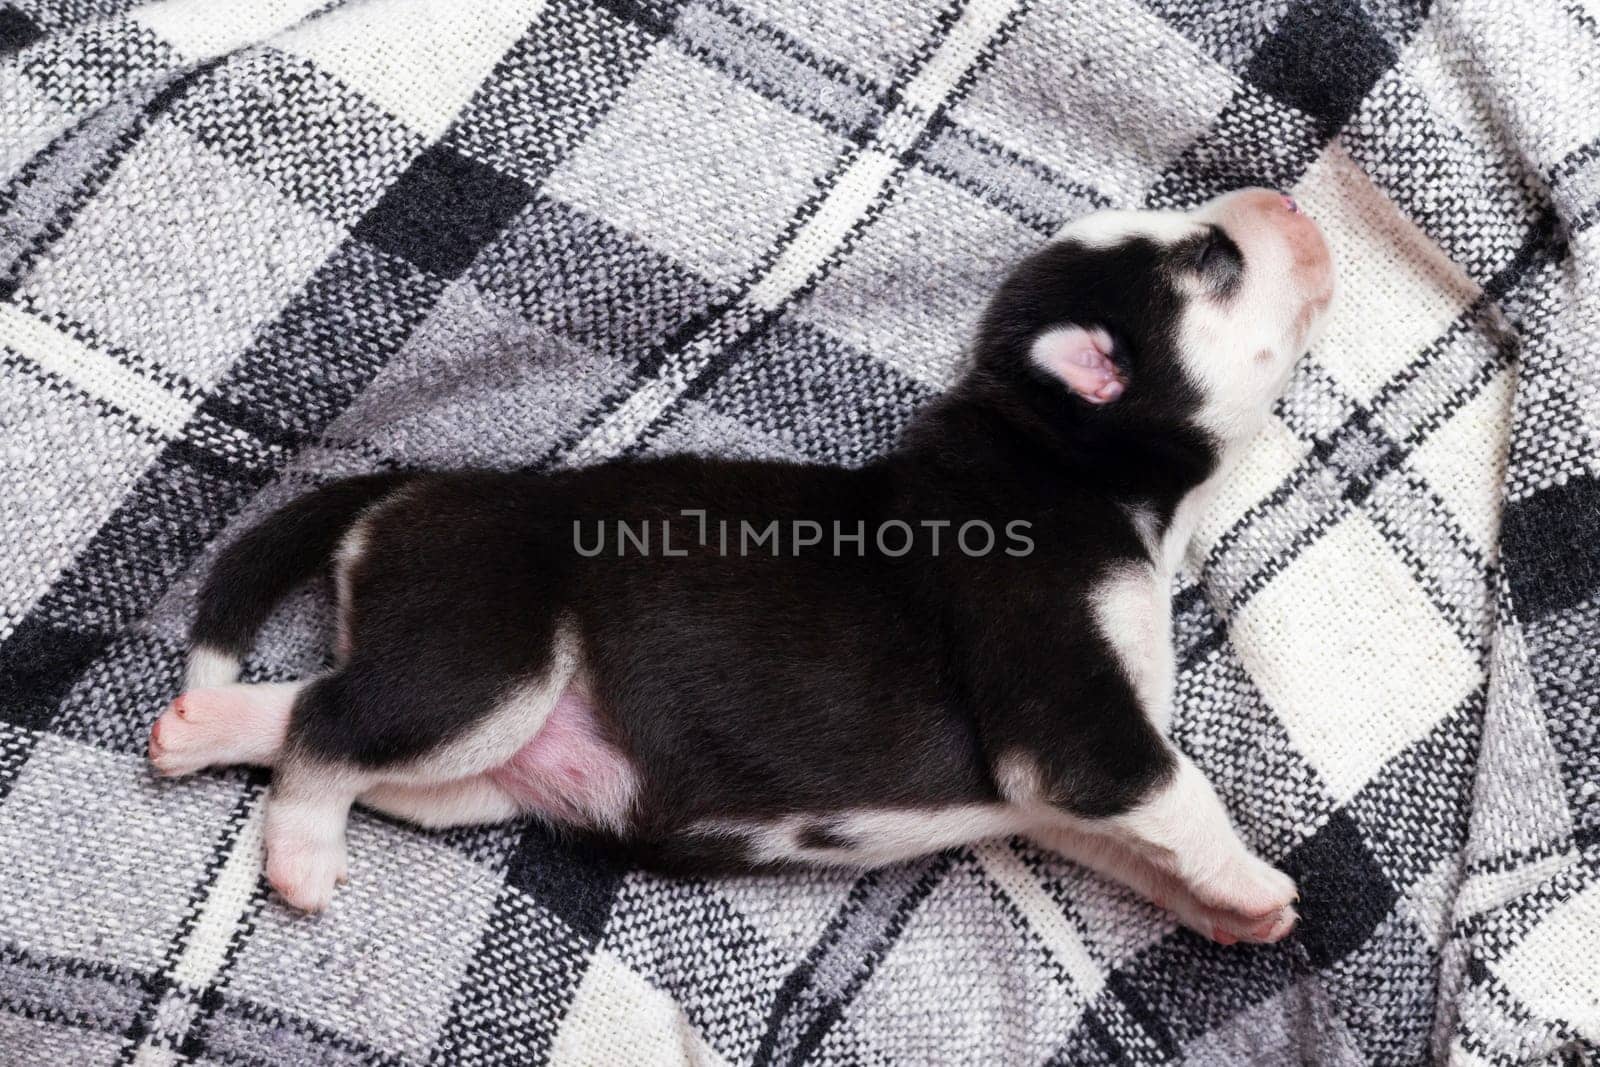 Black and white puppy sleeping on a checkered blanket.